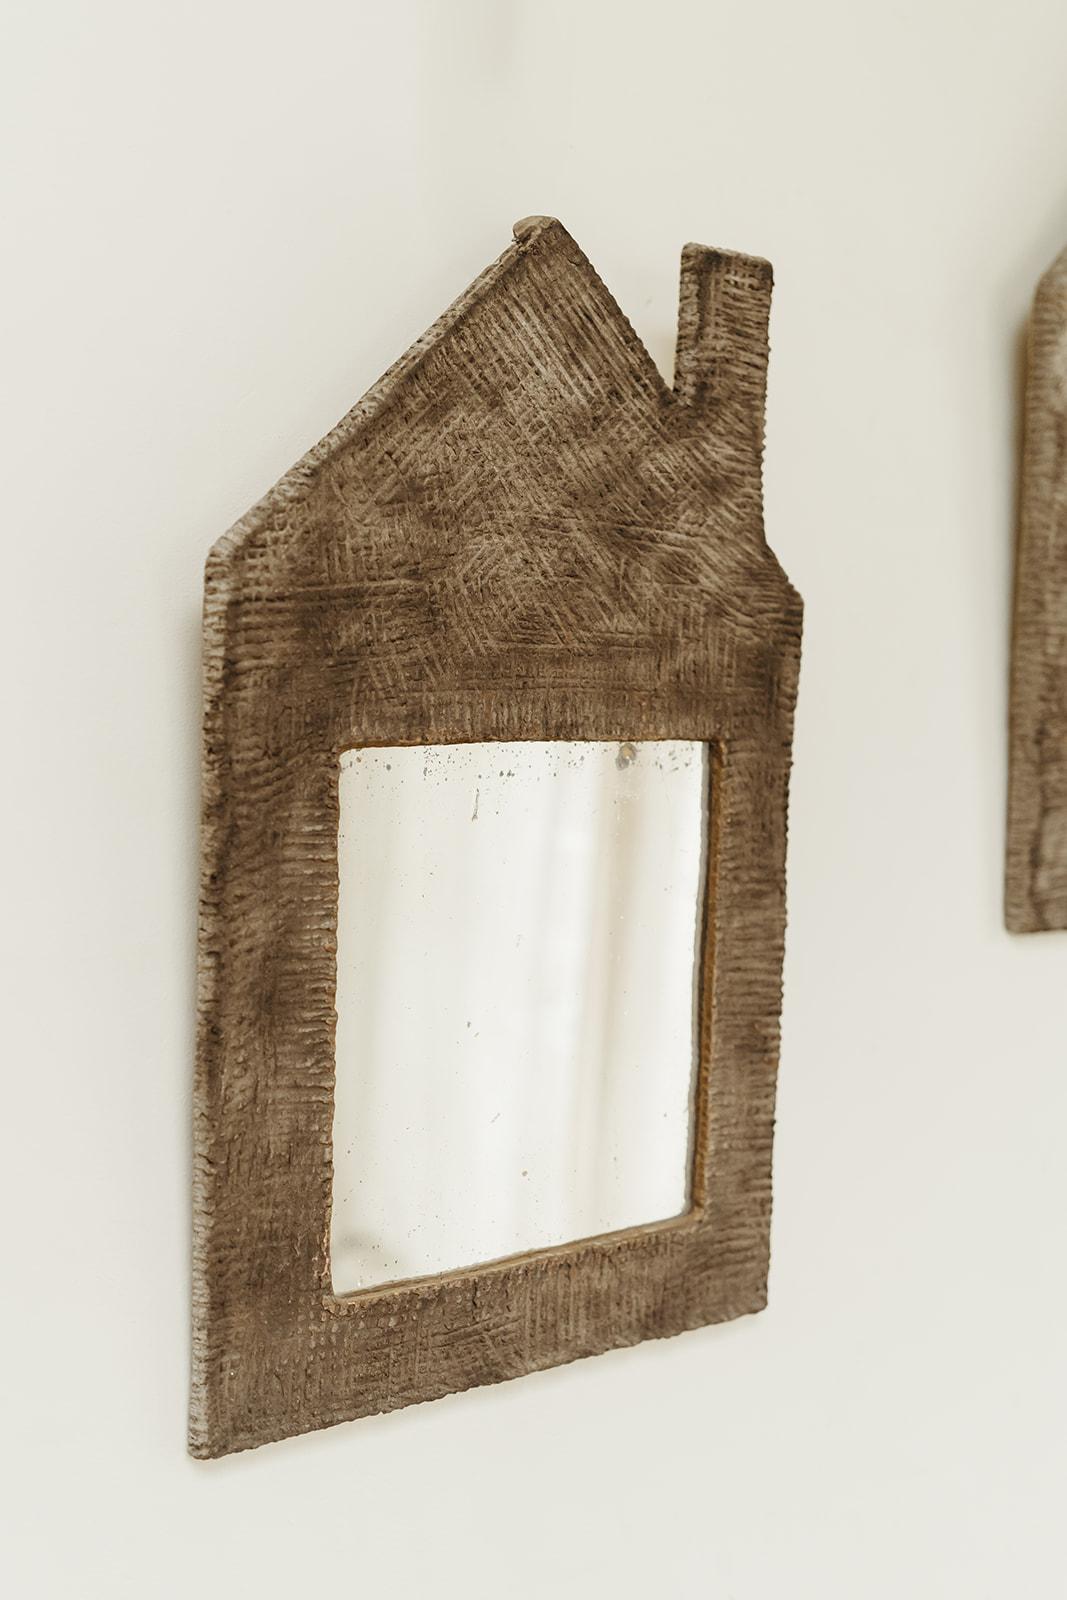 i love the creations of french artist José Esteves, these two mirrors are quirky and fun ... 